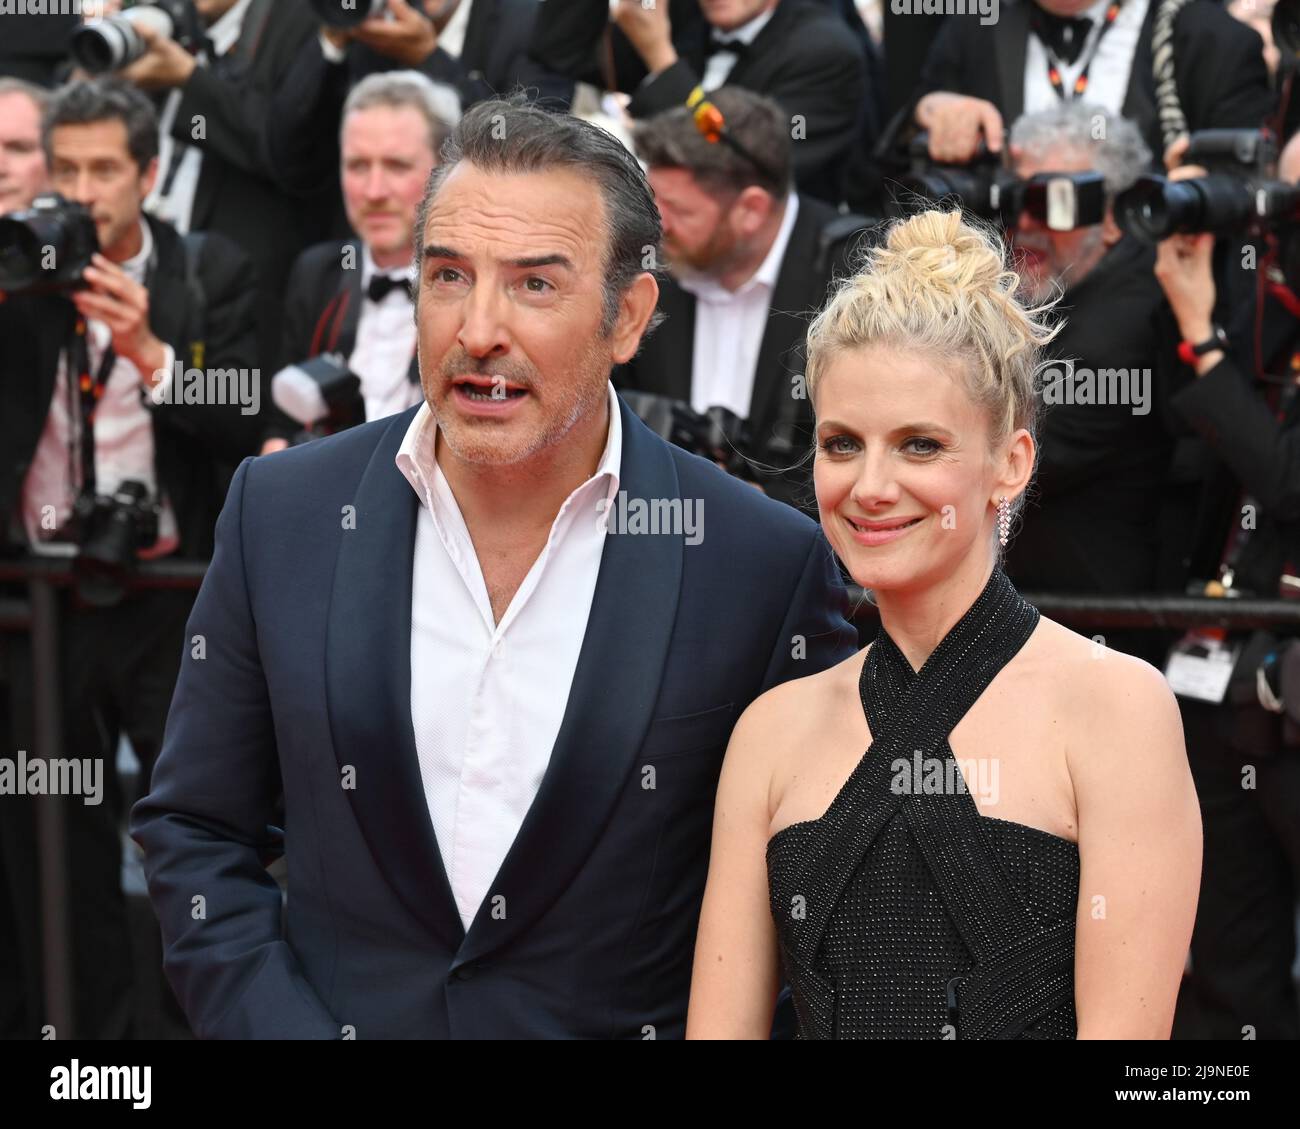 Cannes, France. 24th May, 2022. CANNES, FRANCE. May 24, 2022: Jean Dujardin  & Melanie Laurent at the 75th Anniverary gala and premiere of The Innocent  at the 75th Festival de Cannes. Picture